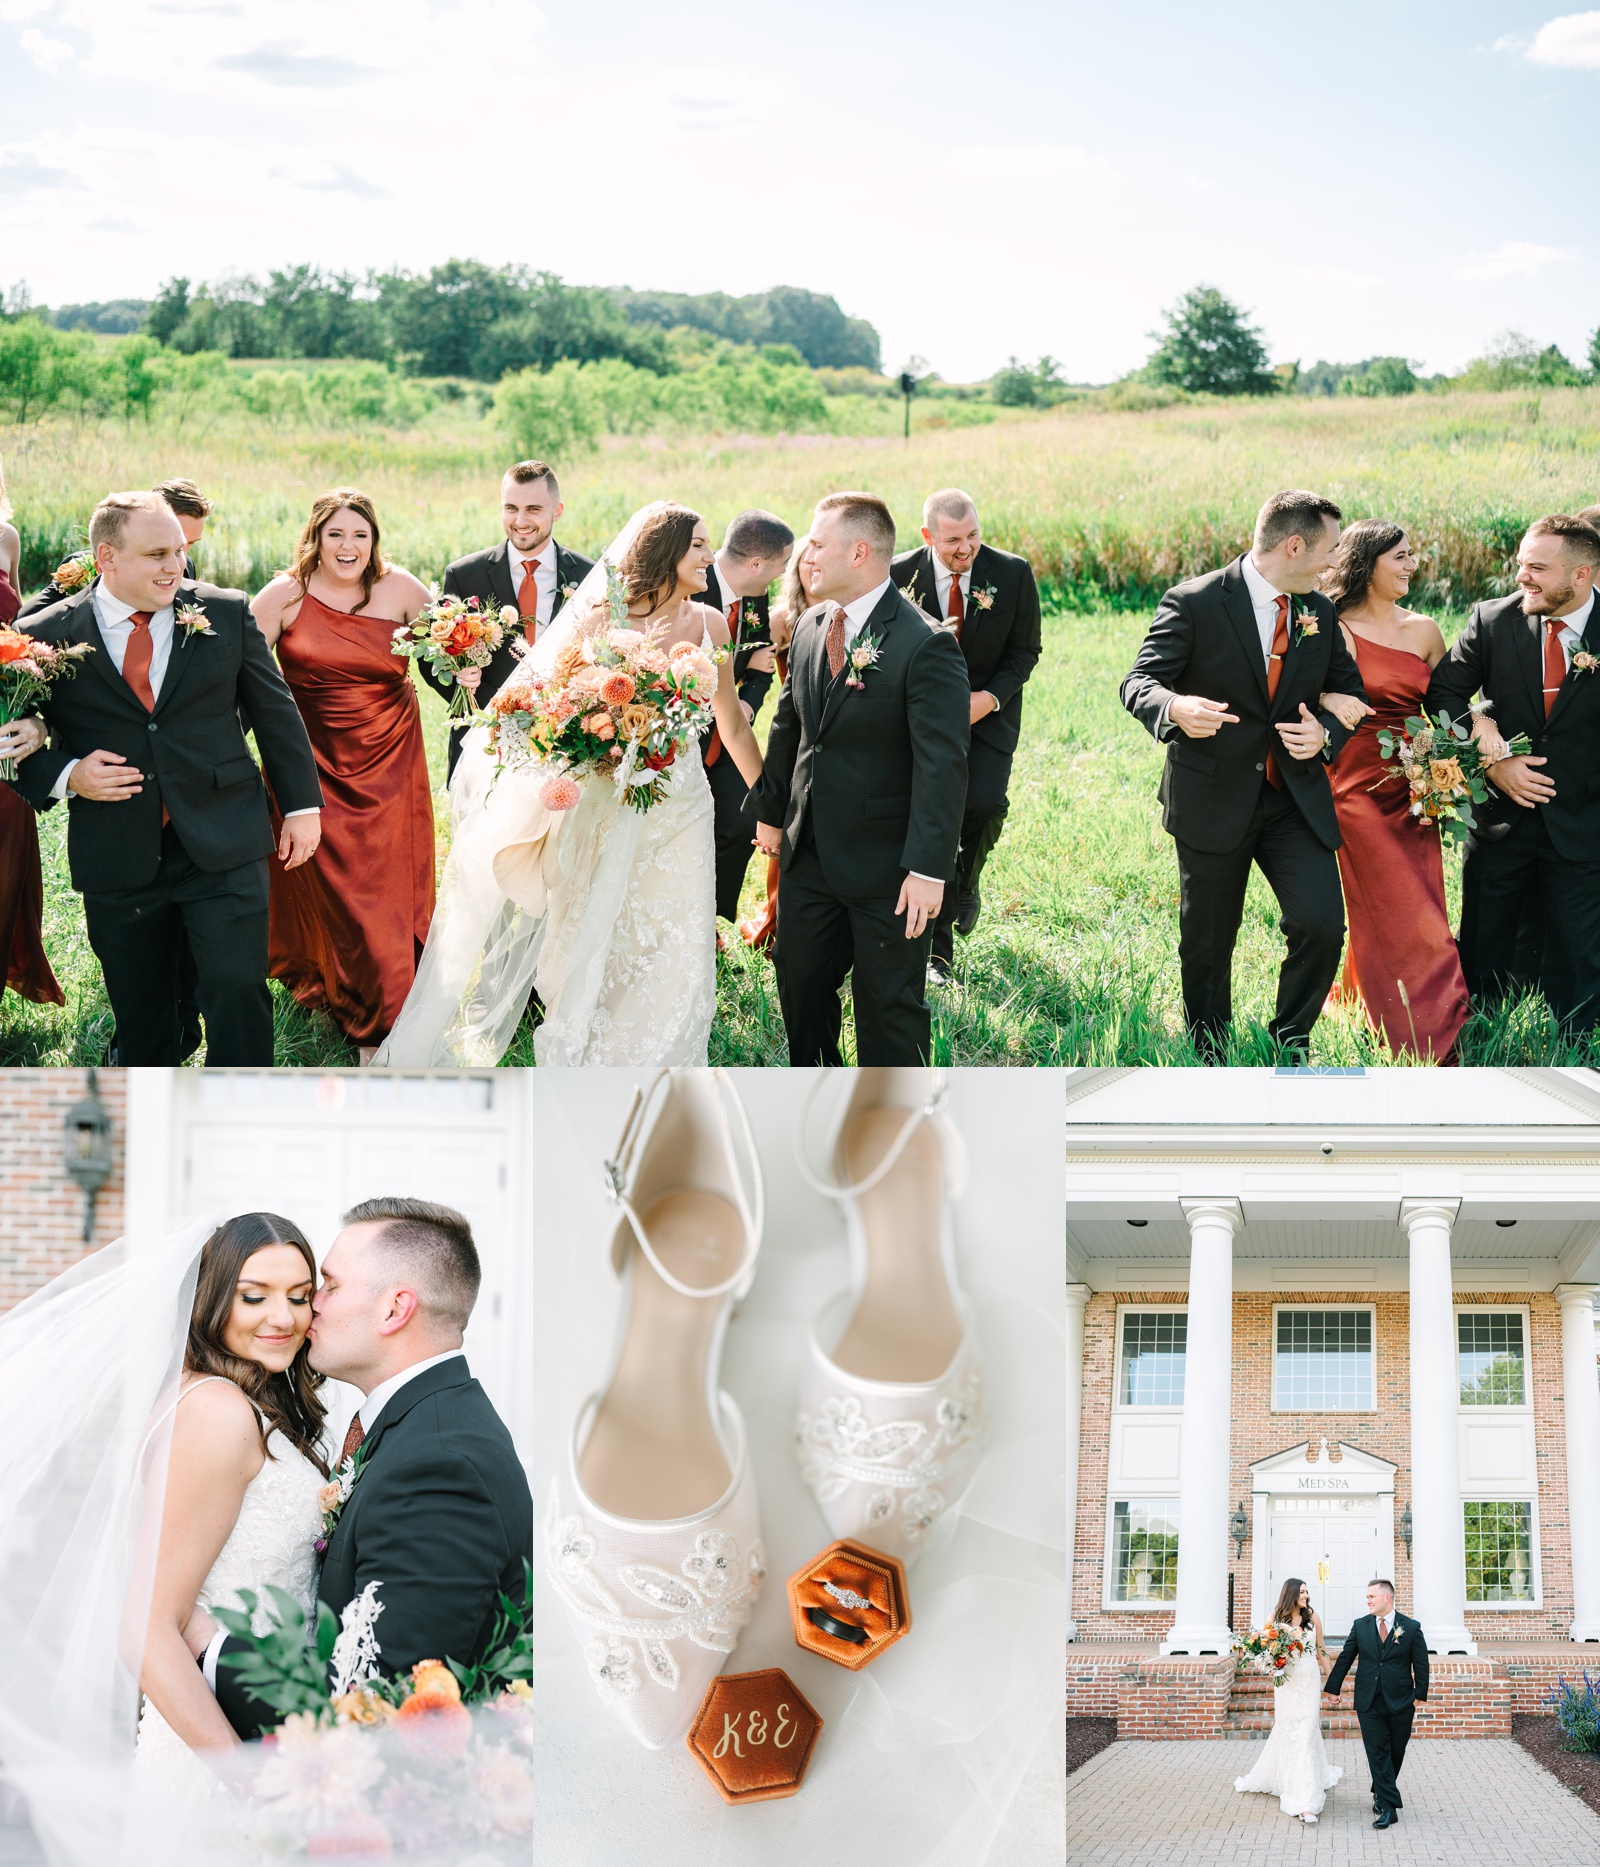 Rust and Champagne Wedding at The Grand Resort in Canfield Ohio